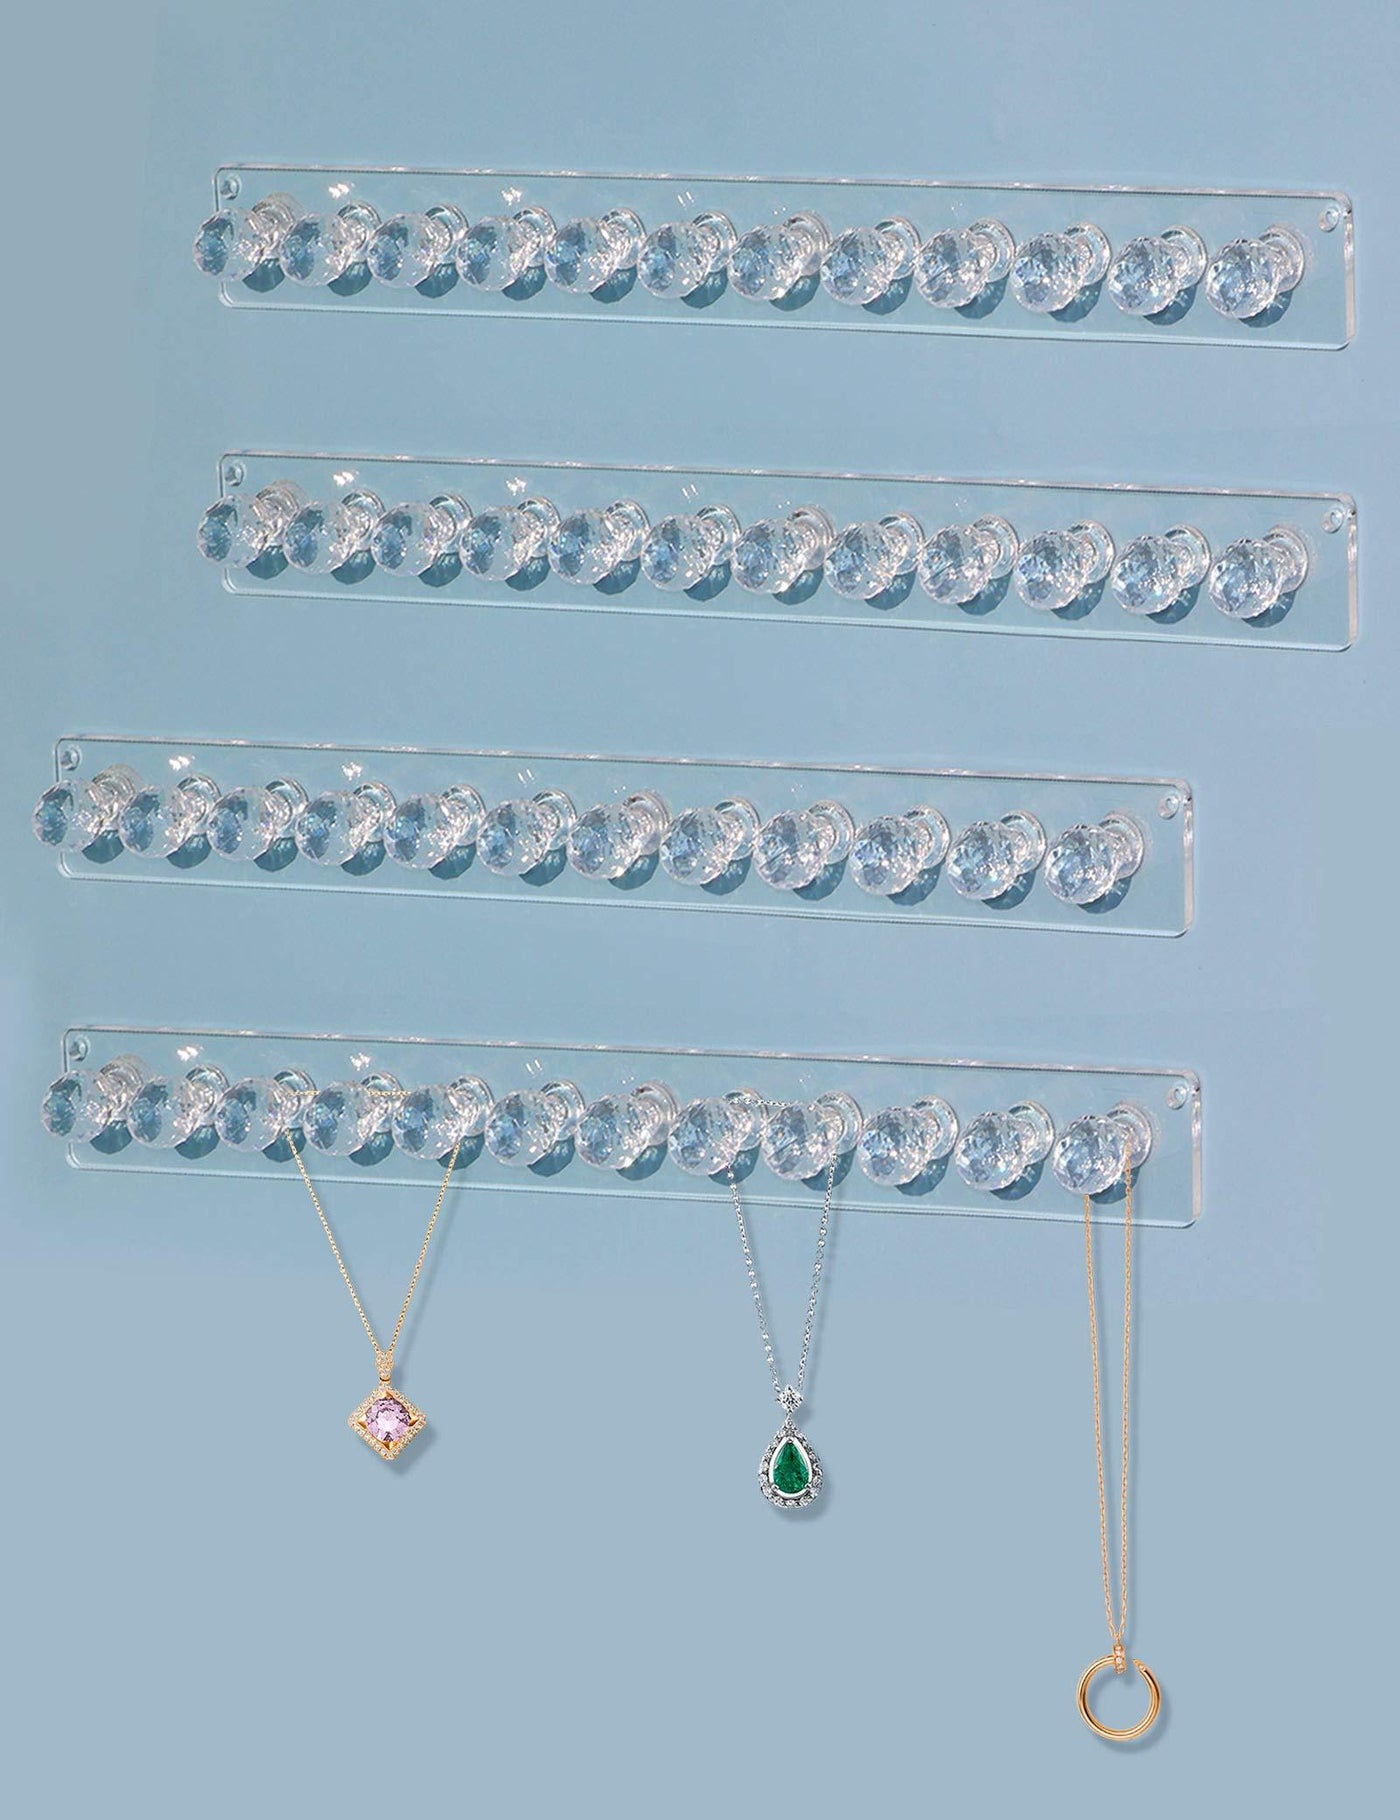 Necklace Hanger, Acrylic Necklace Organizer Wall Mount Necklace Holder, Jewelry  Hooks For Necklaces, Bracelets, Chains